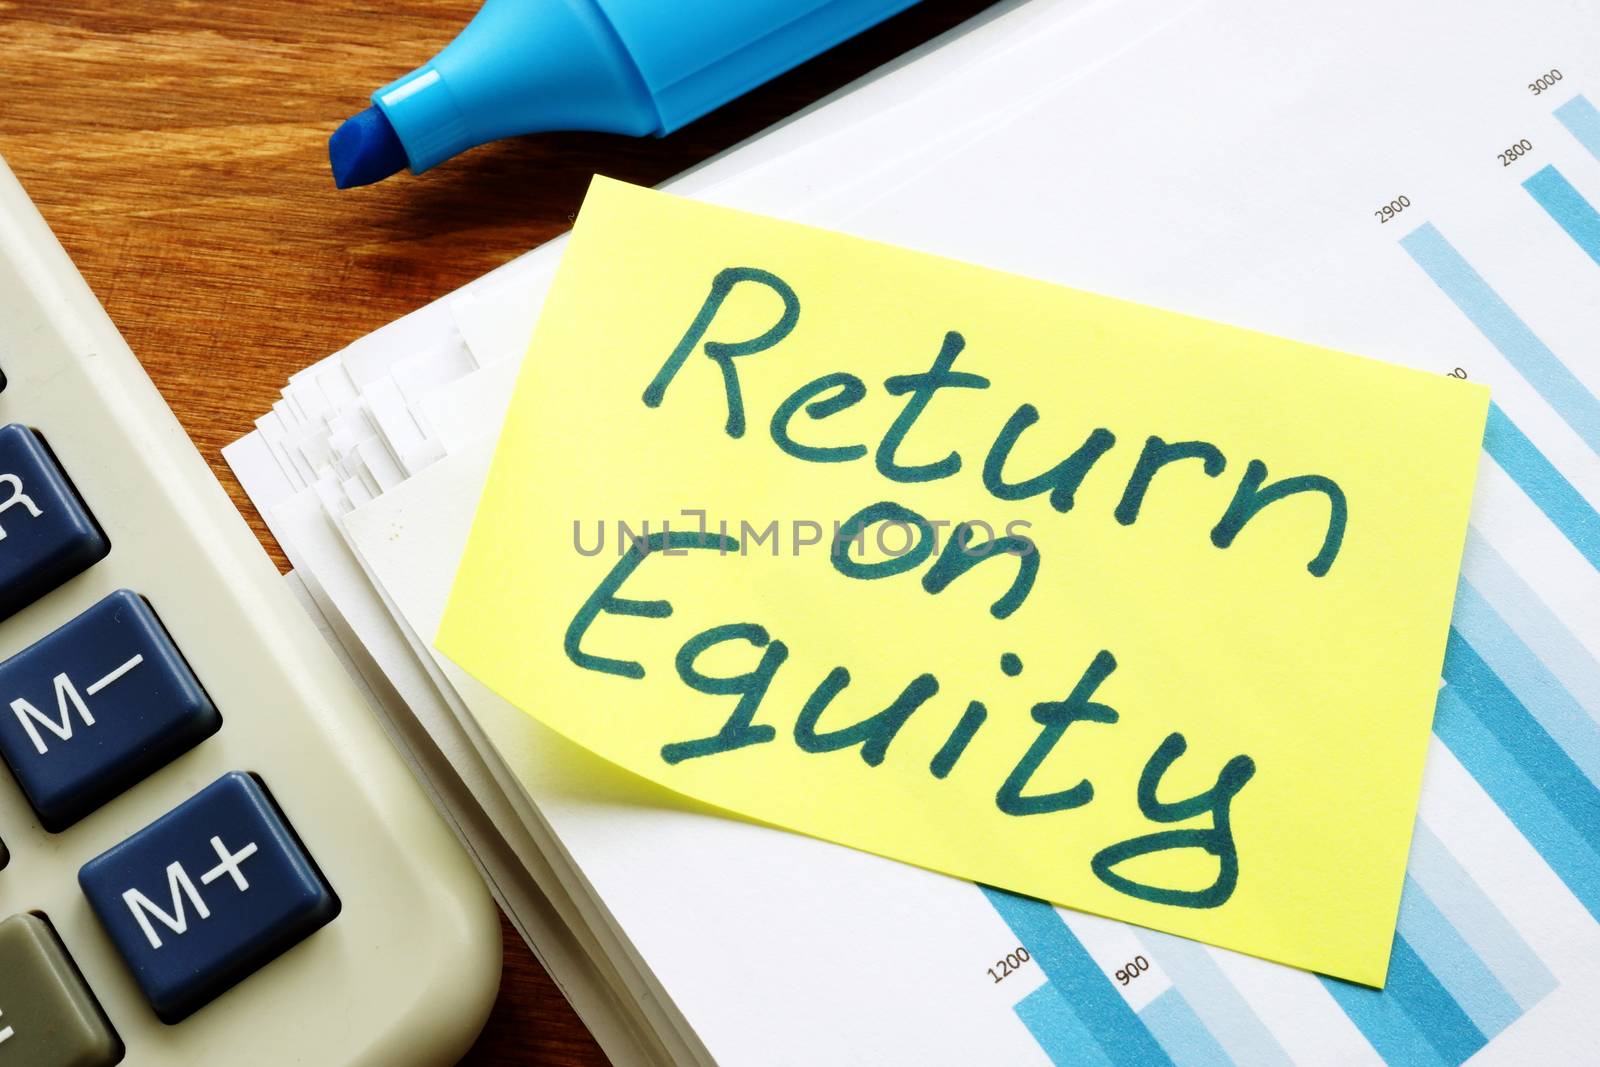 Return on equity inscription and pile of business documents. by designer491